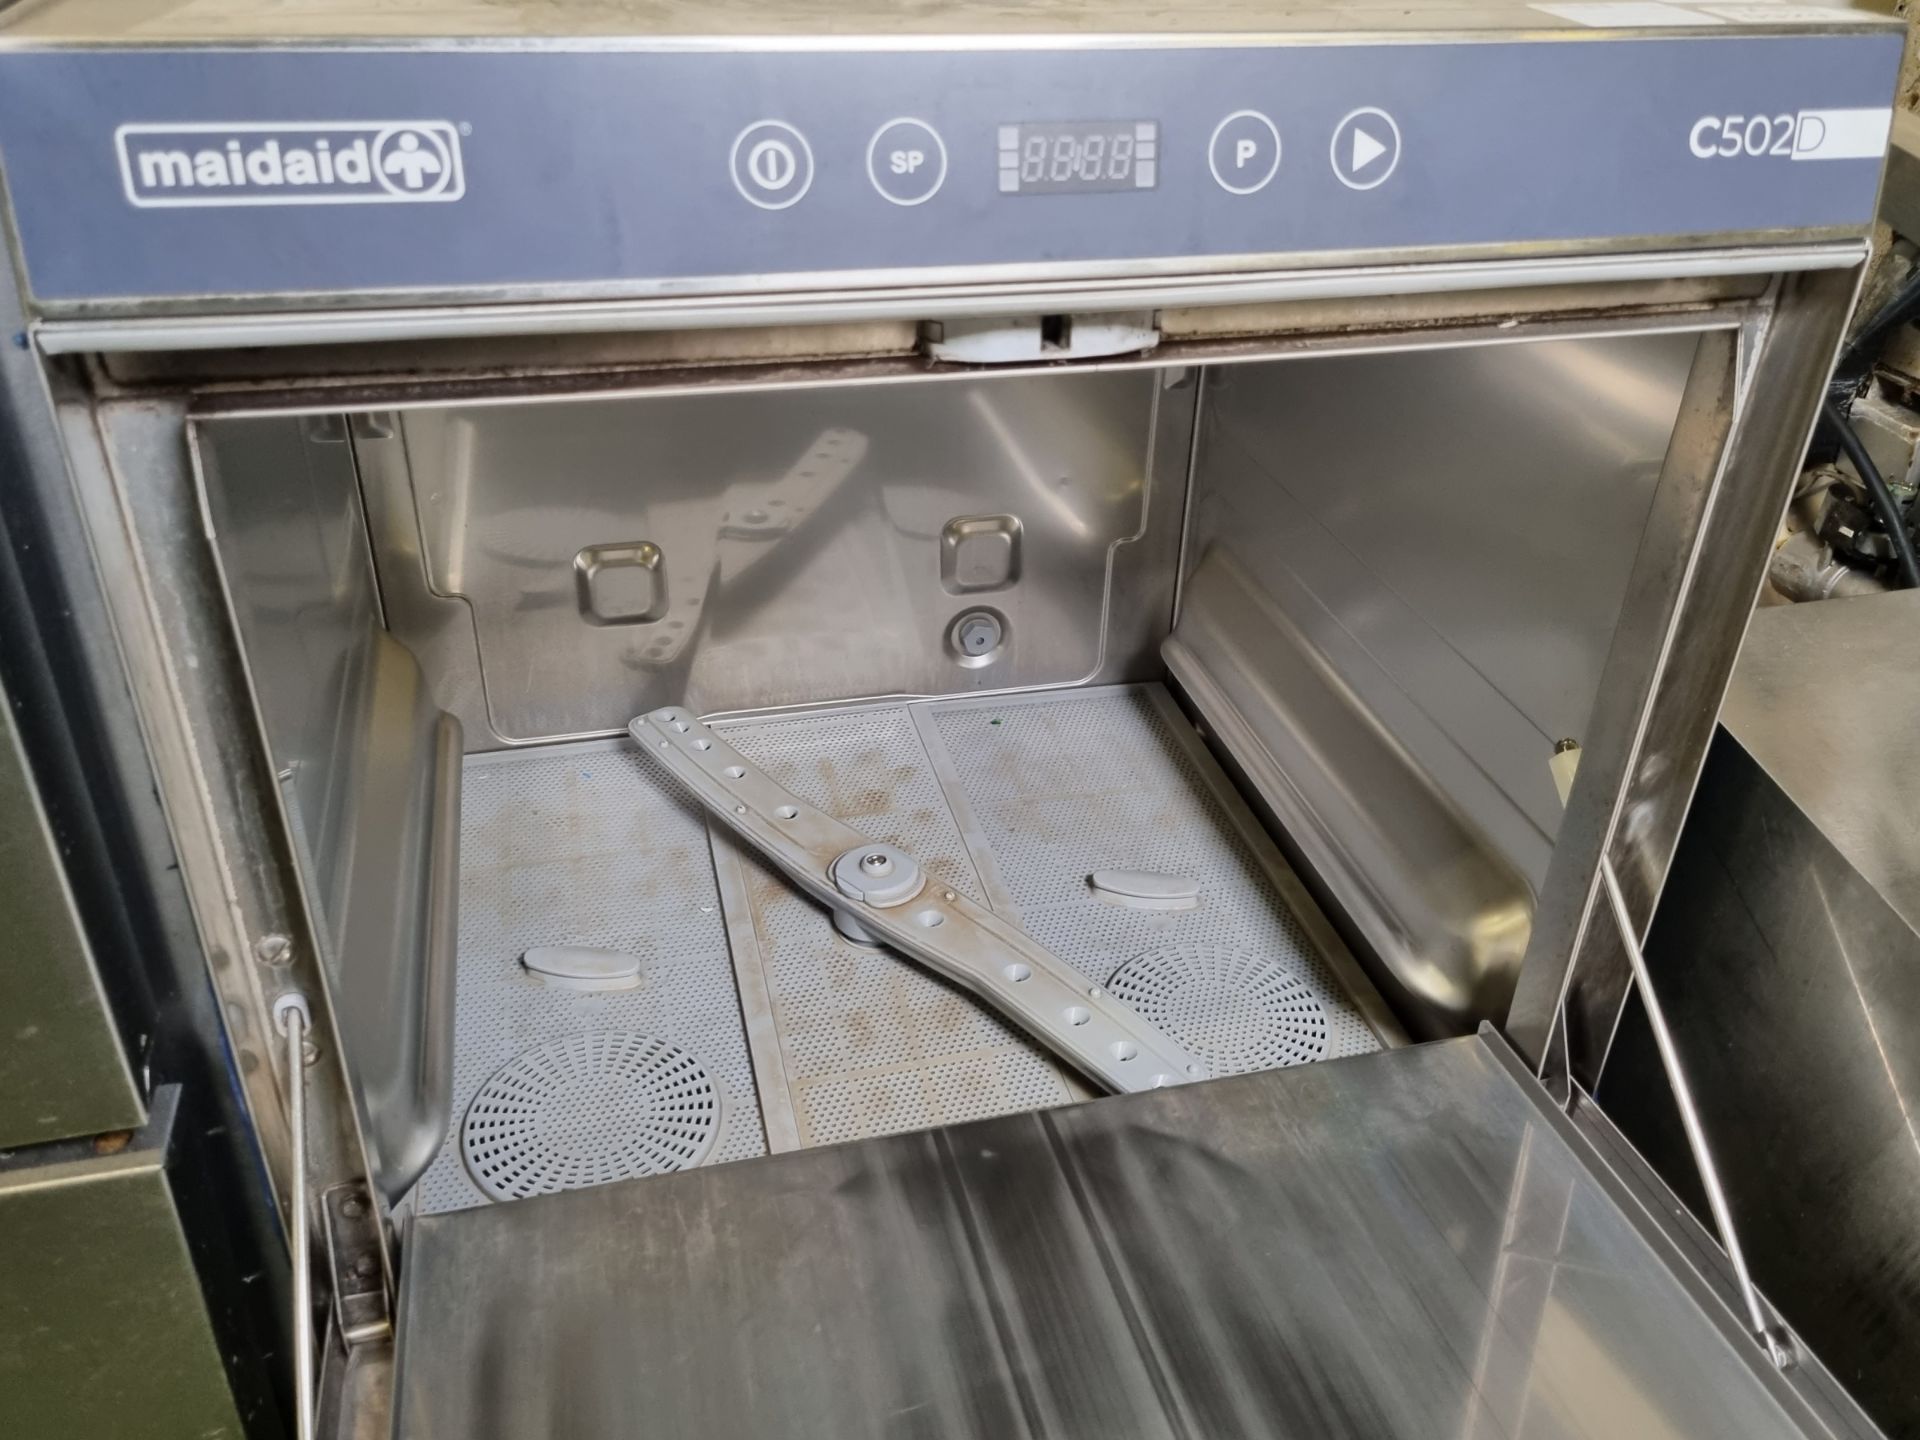 Maidaid C502D undercounter glass washer - 580mm W - Image 4 of 4